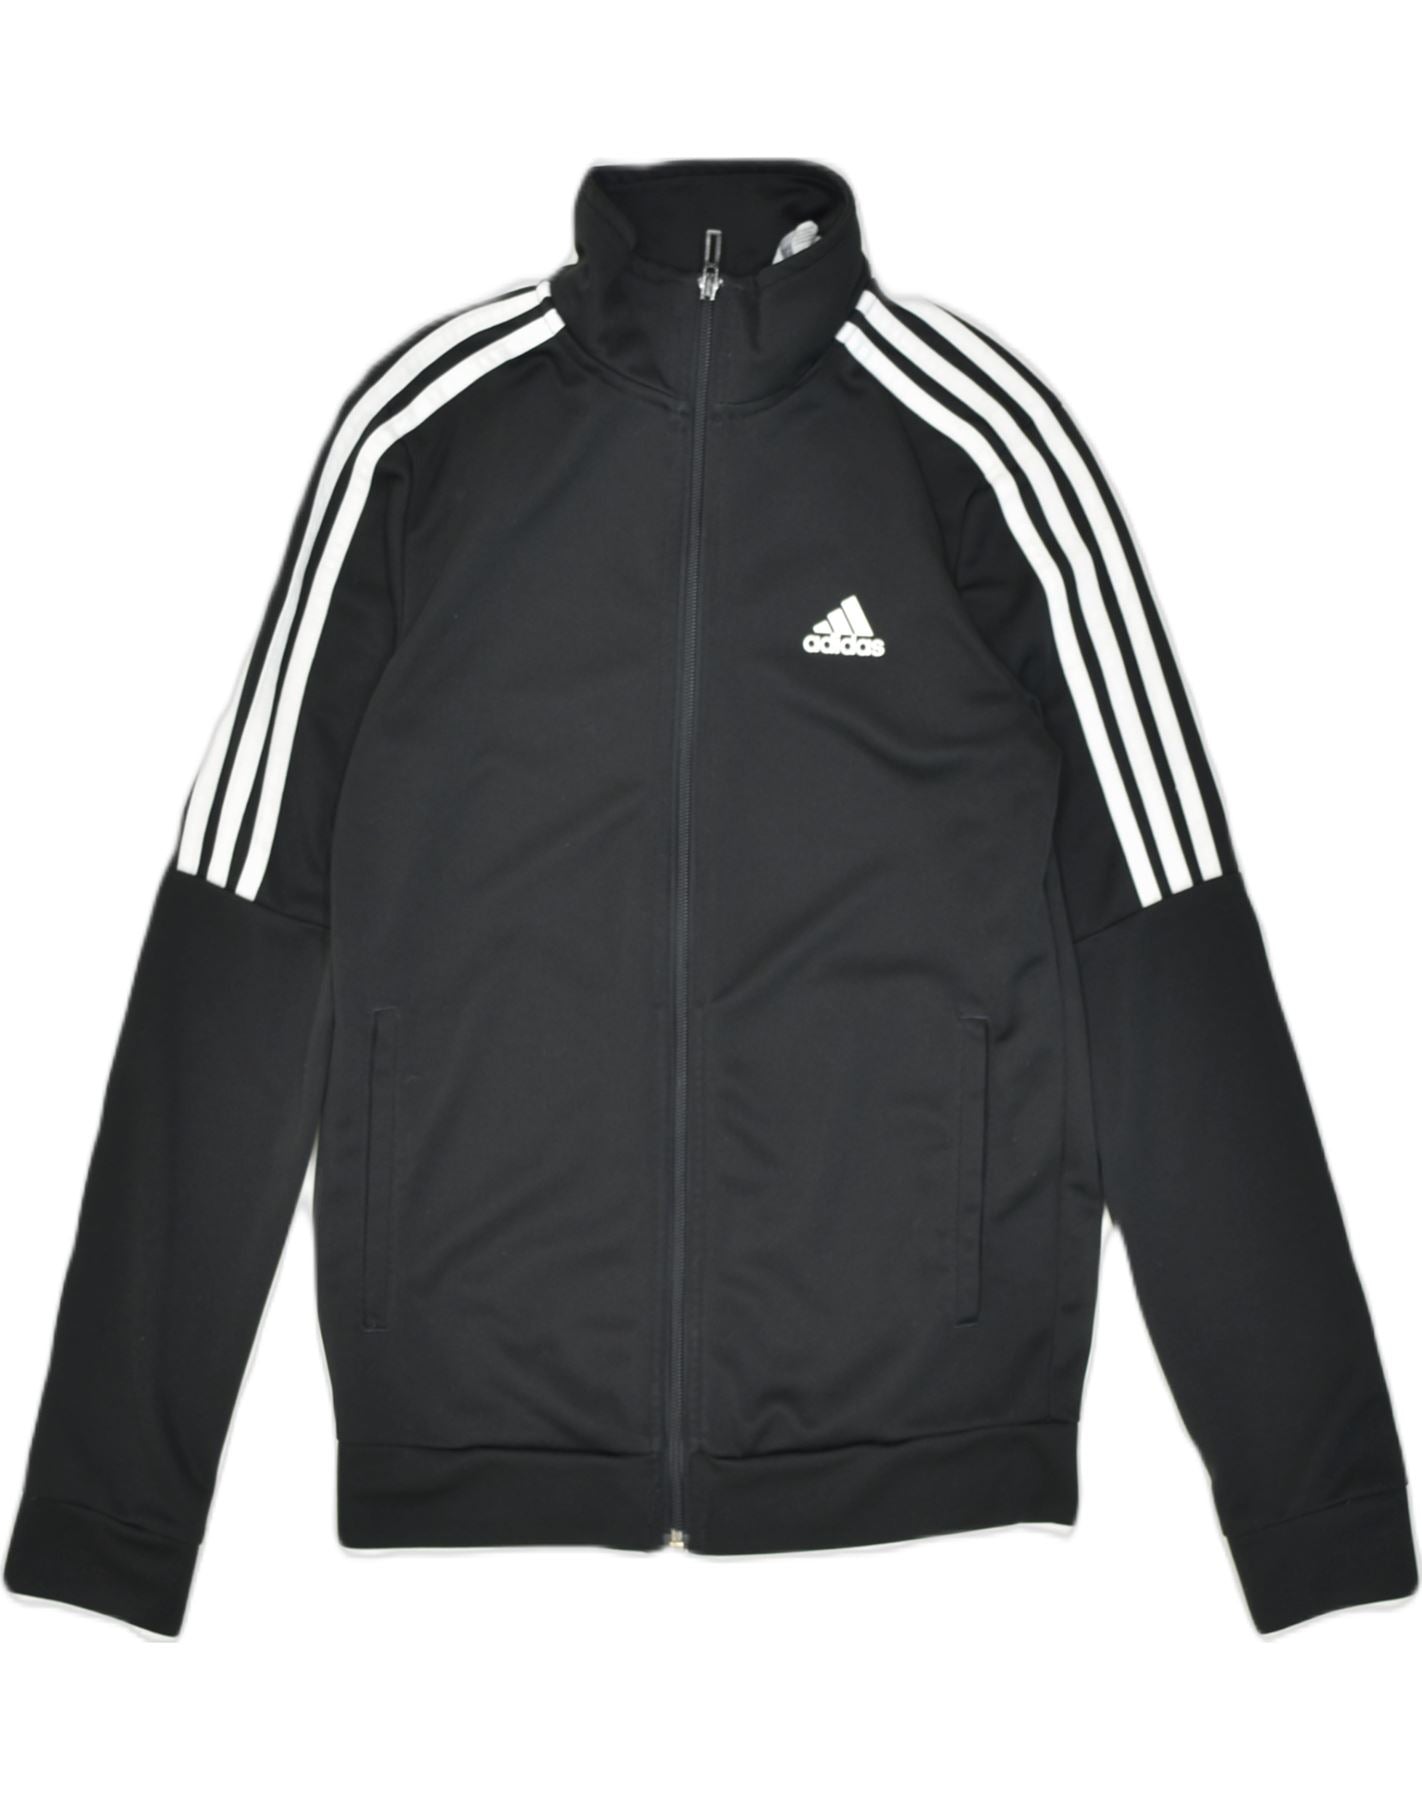 ADIDAS Womens Tracksuit Top Jacket UK 8/10 Small Black Polyester